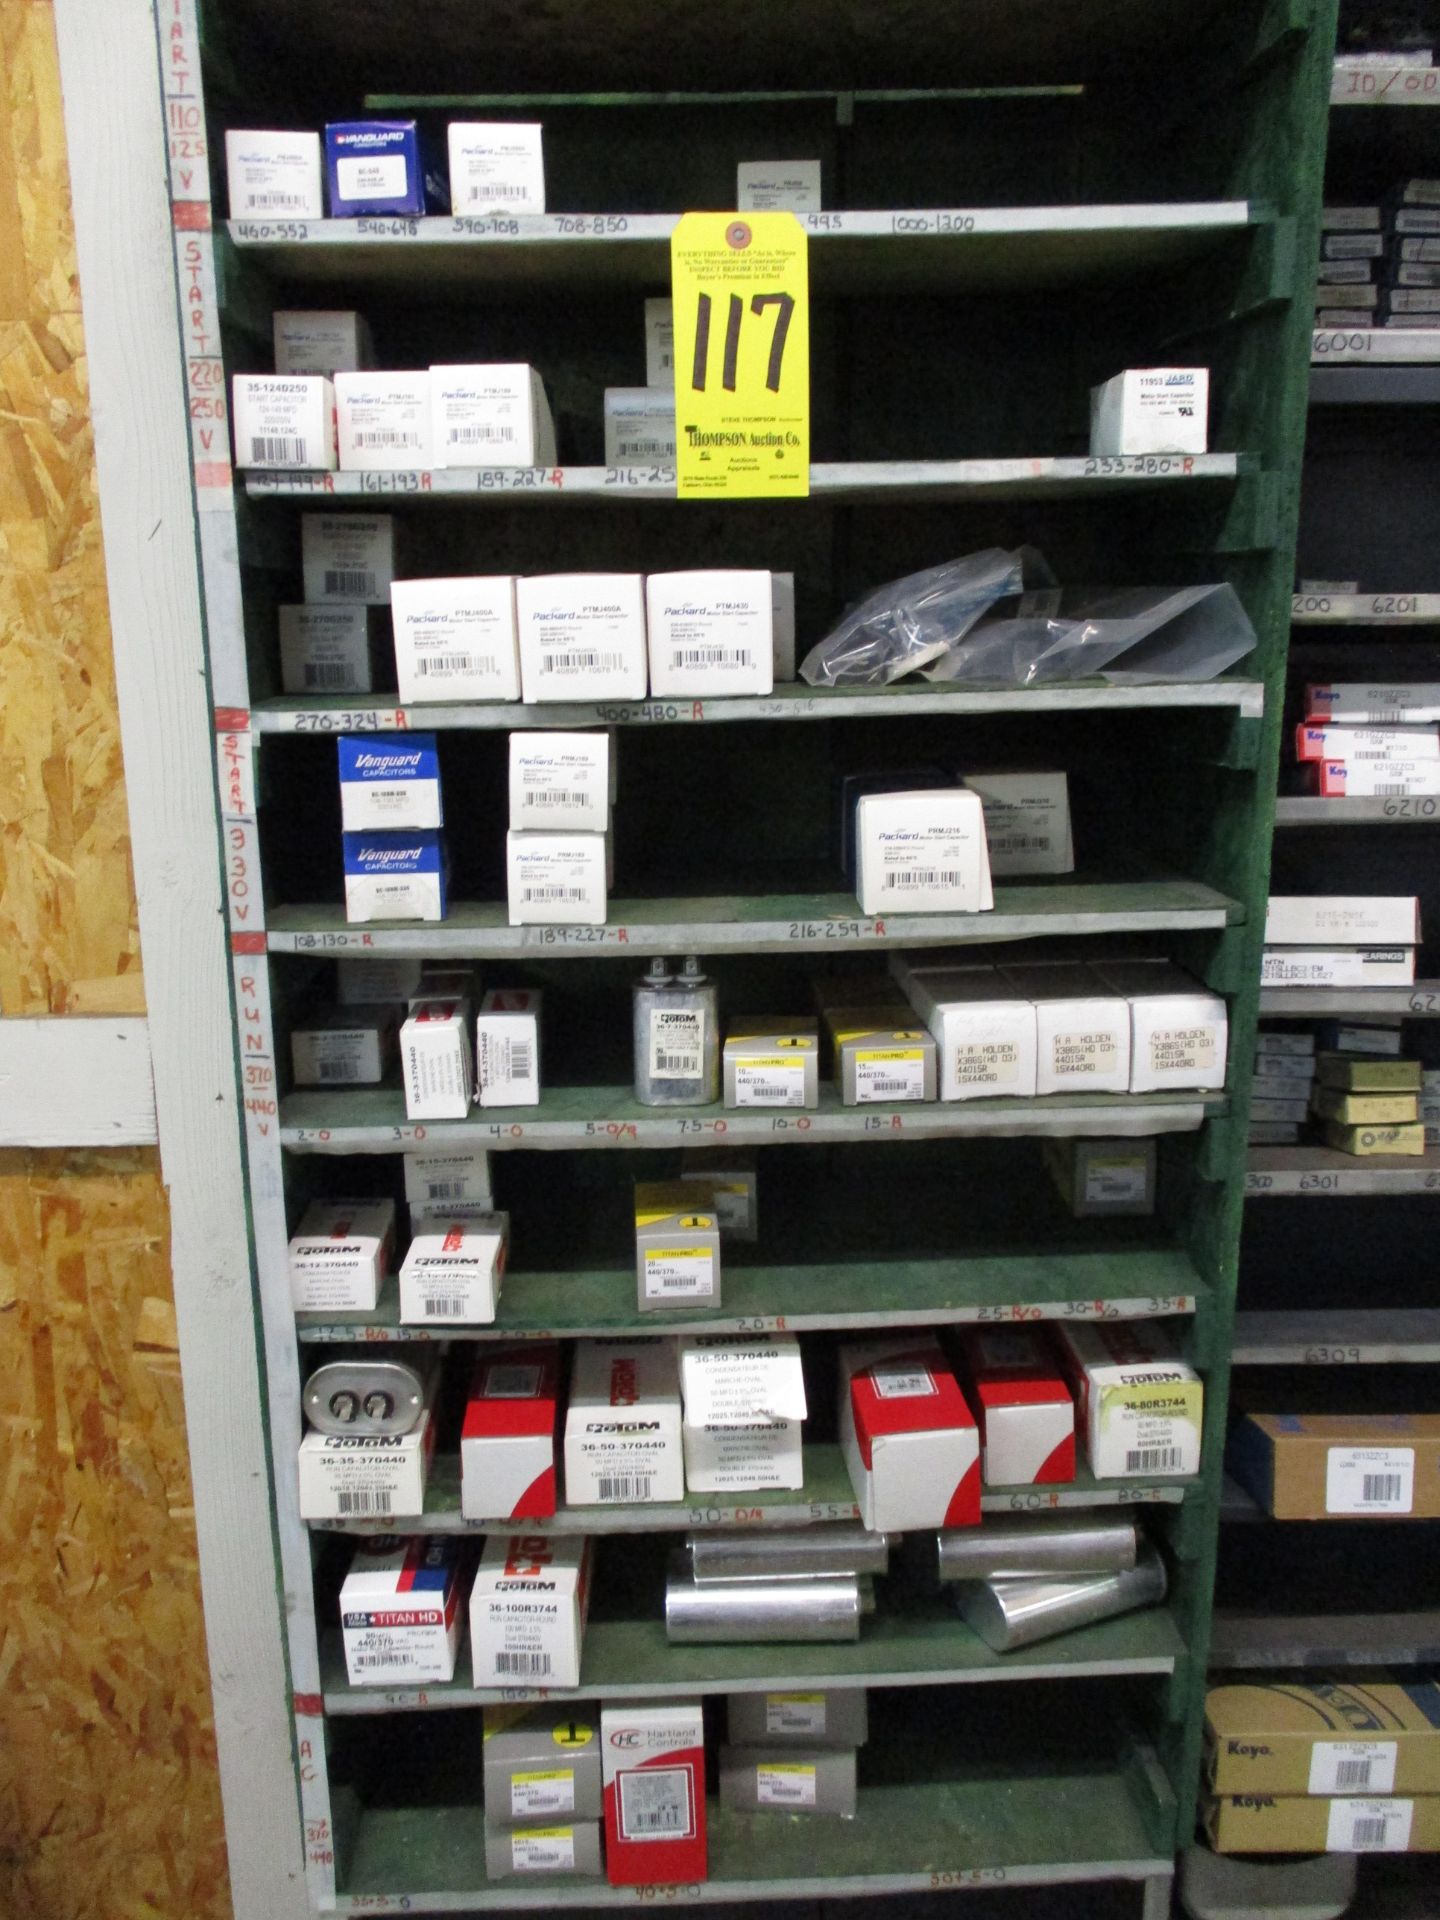 Contents of Wood Shelving including Seals & Misc. Electrical Hardware including Capacitors